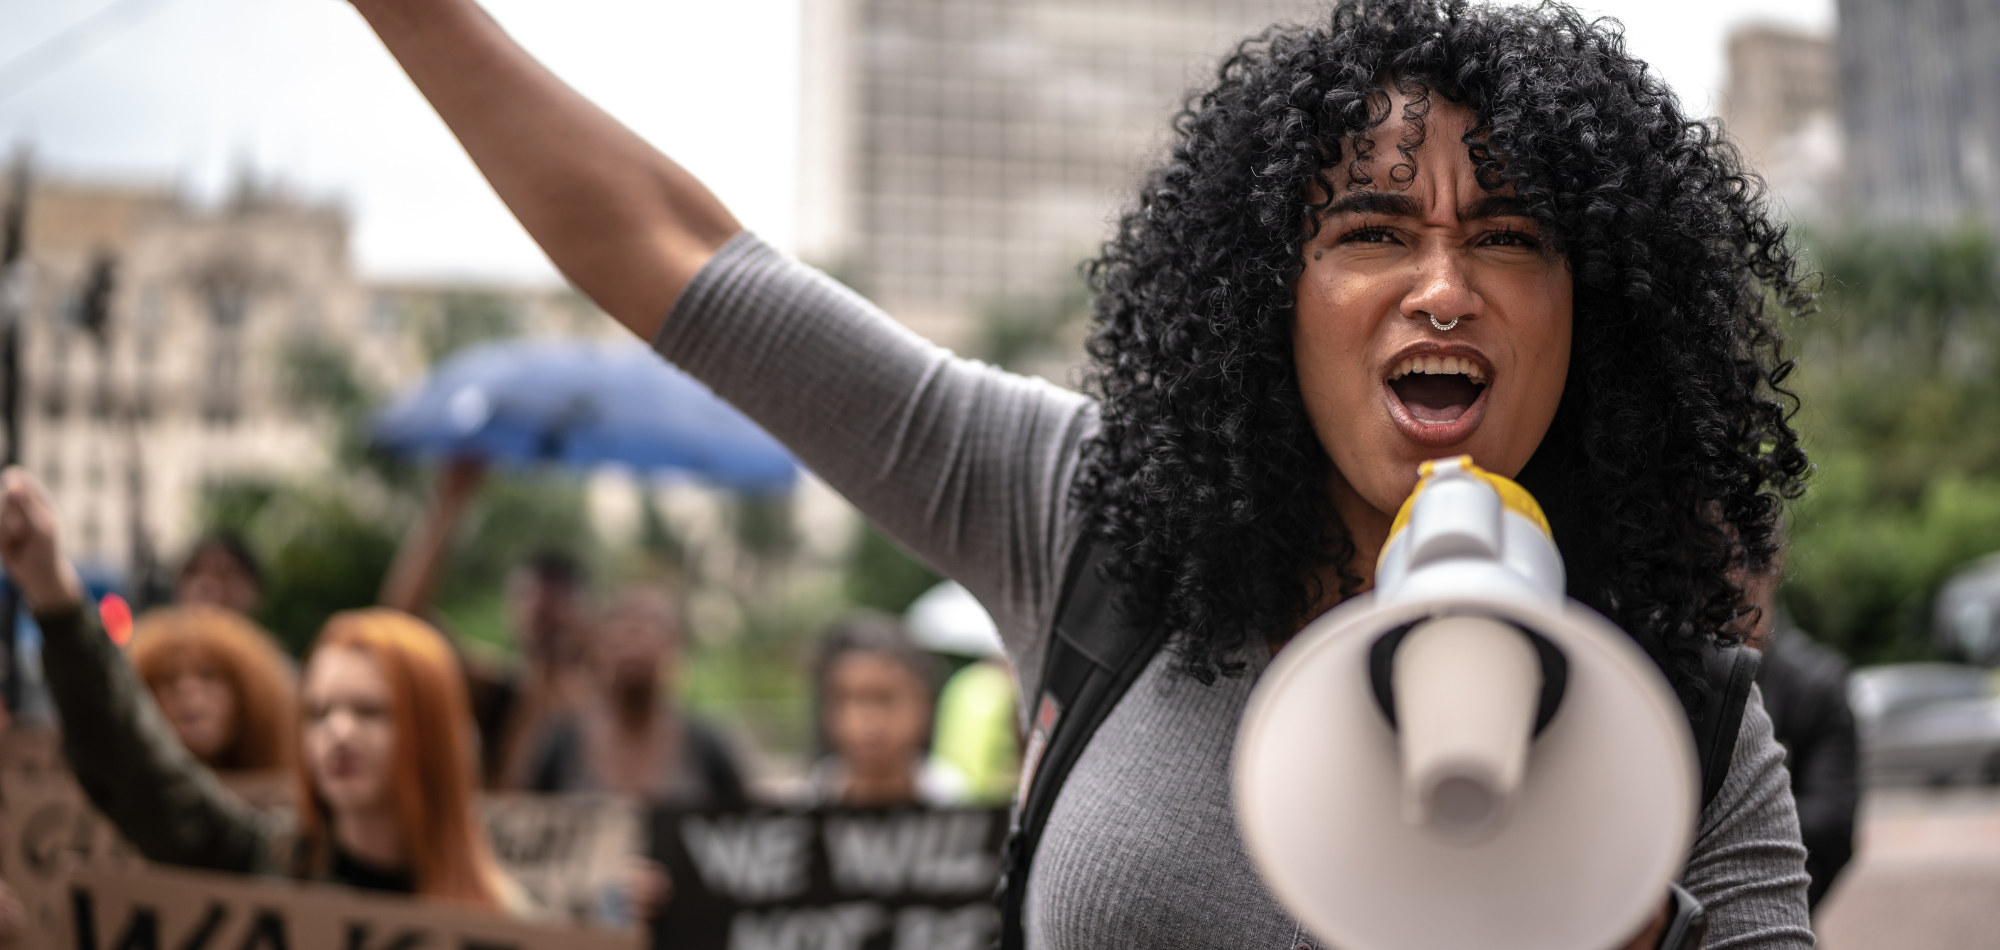 A young femme adult is shouting into a white and yellow megaphone. She is wearing a gray T-shirt and has dark, curly, shoulder-length hair. She looks determined and inspired. Behind her are other protesters with signs. They're marching in an urban setting.